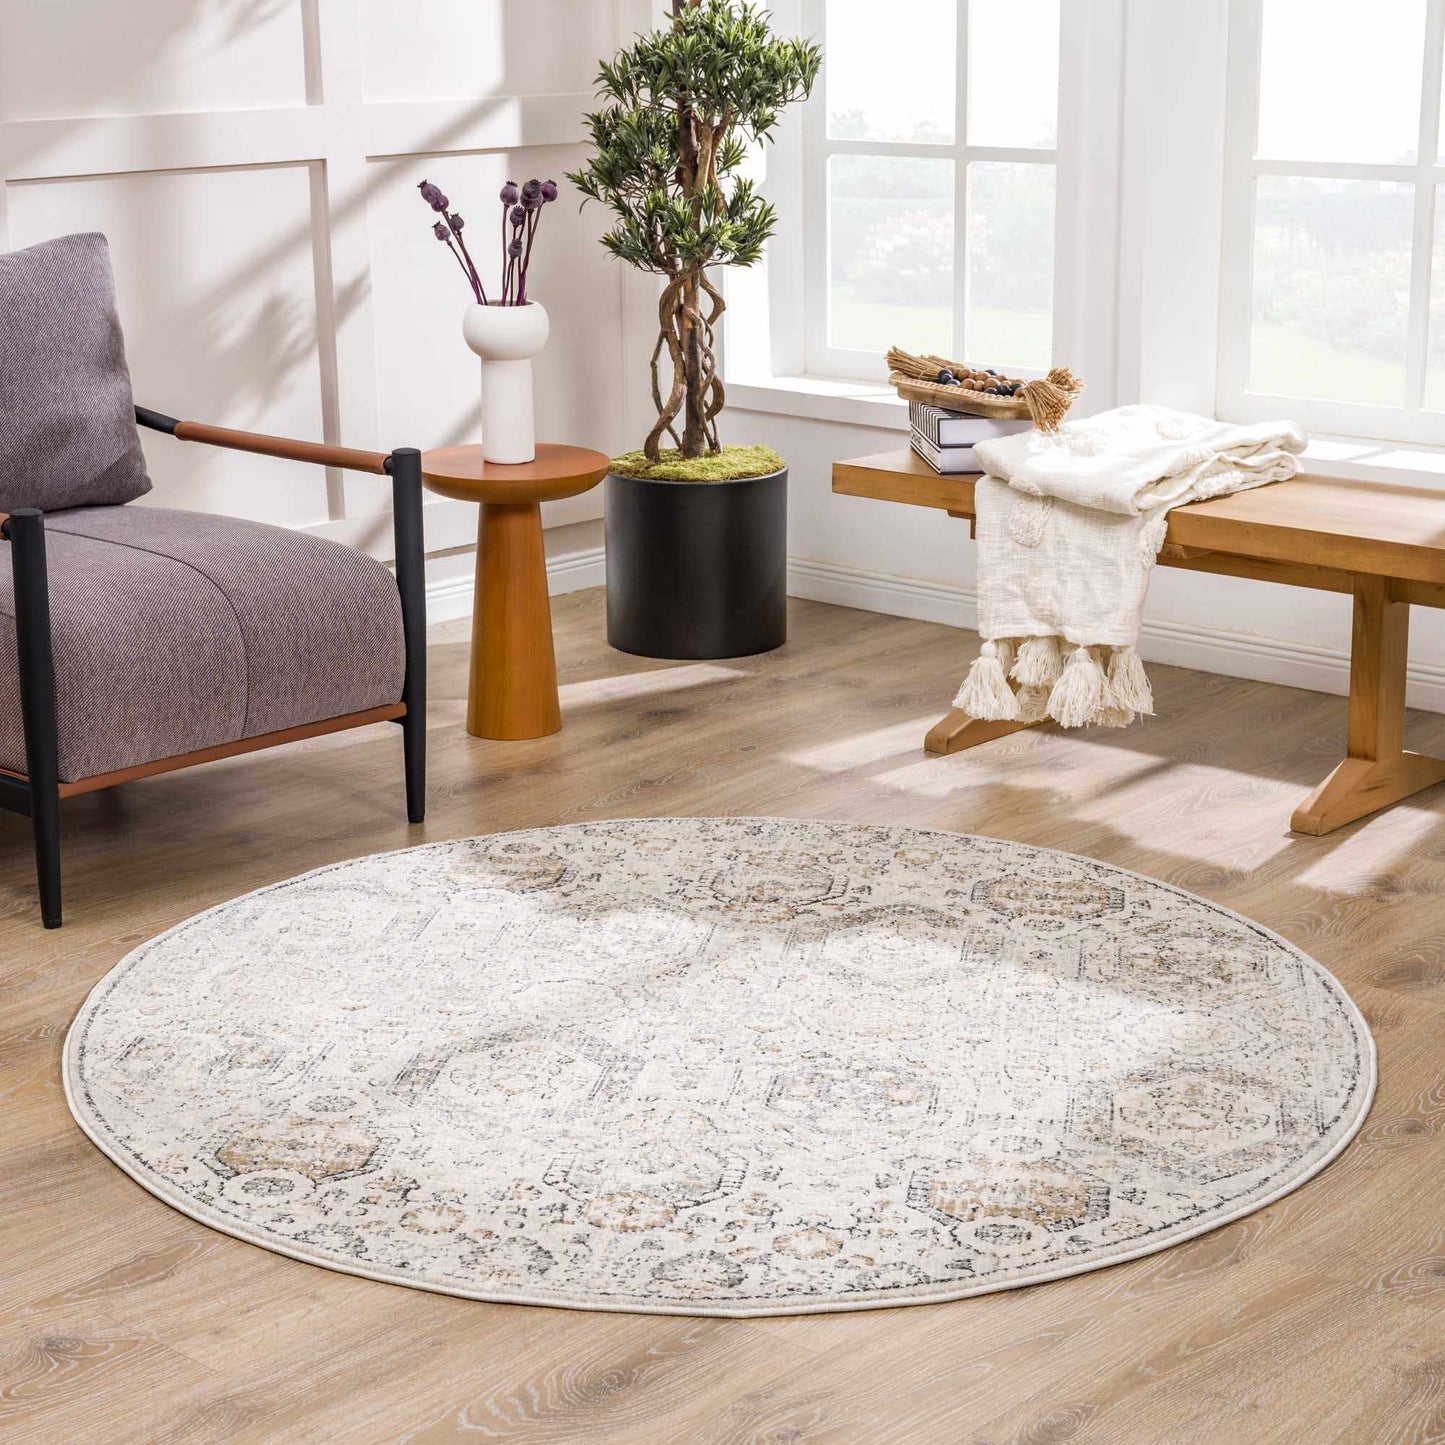 Parkerfield Area Rug.